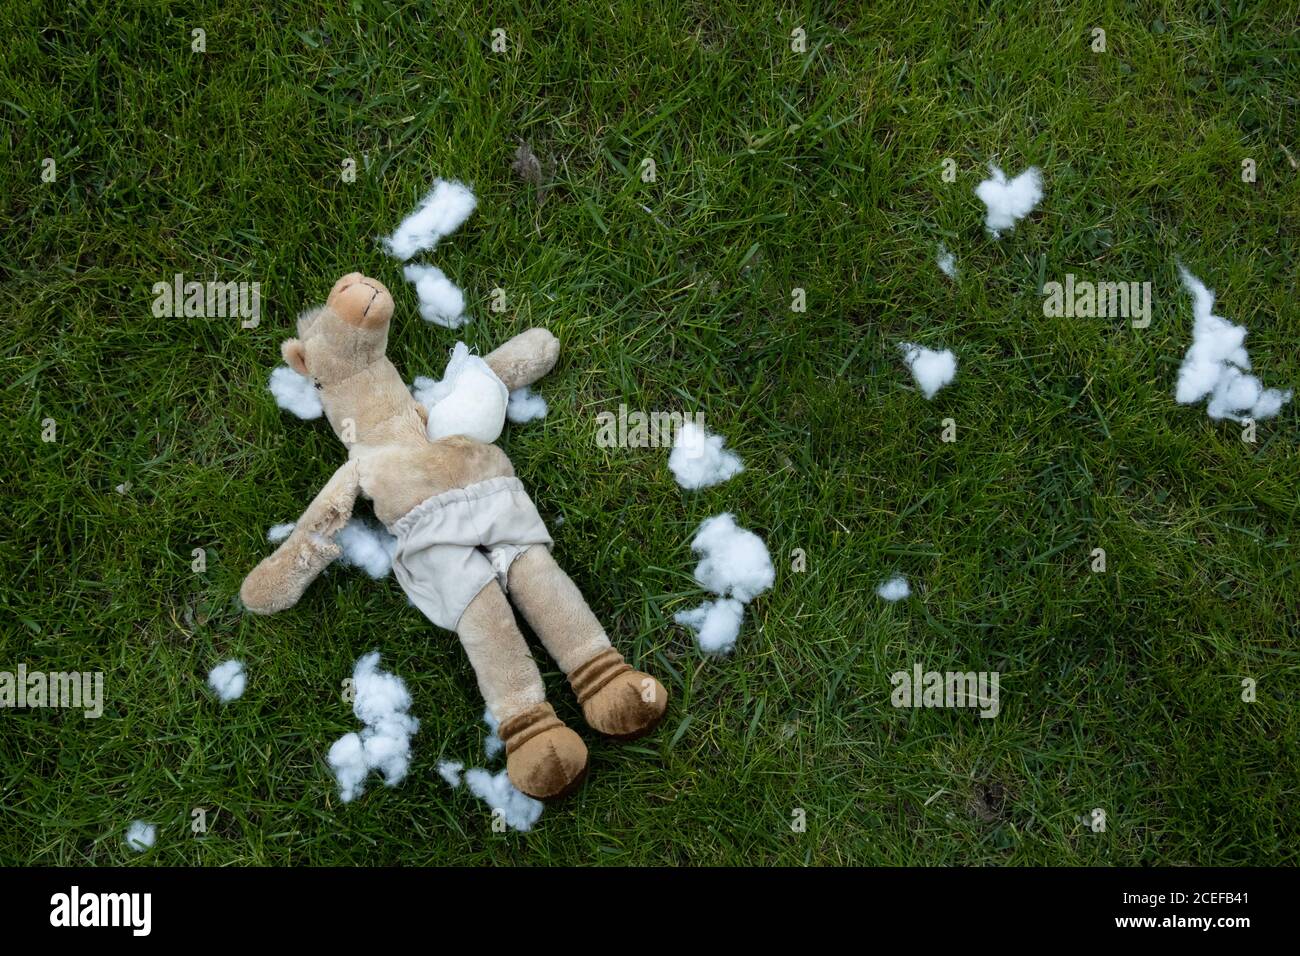 an eviscerated stuffed animal on the grass Stock Photo